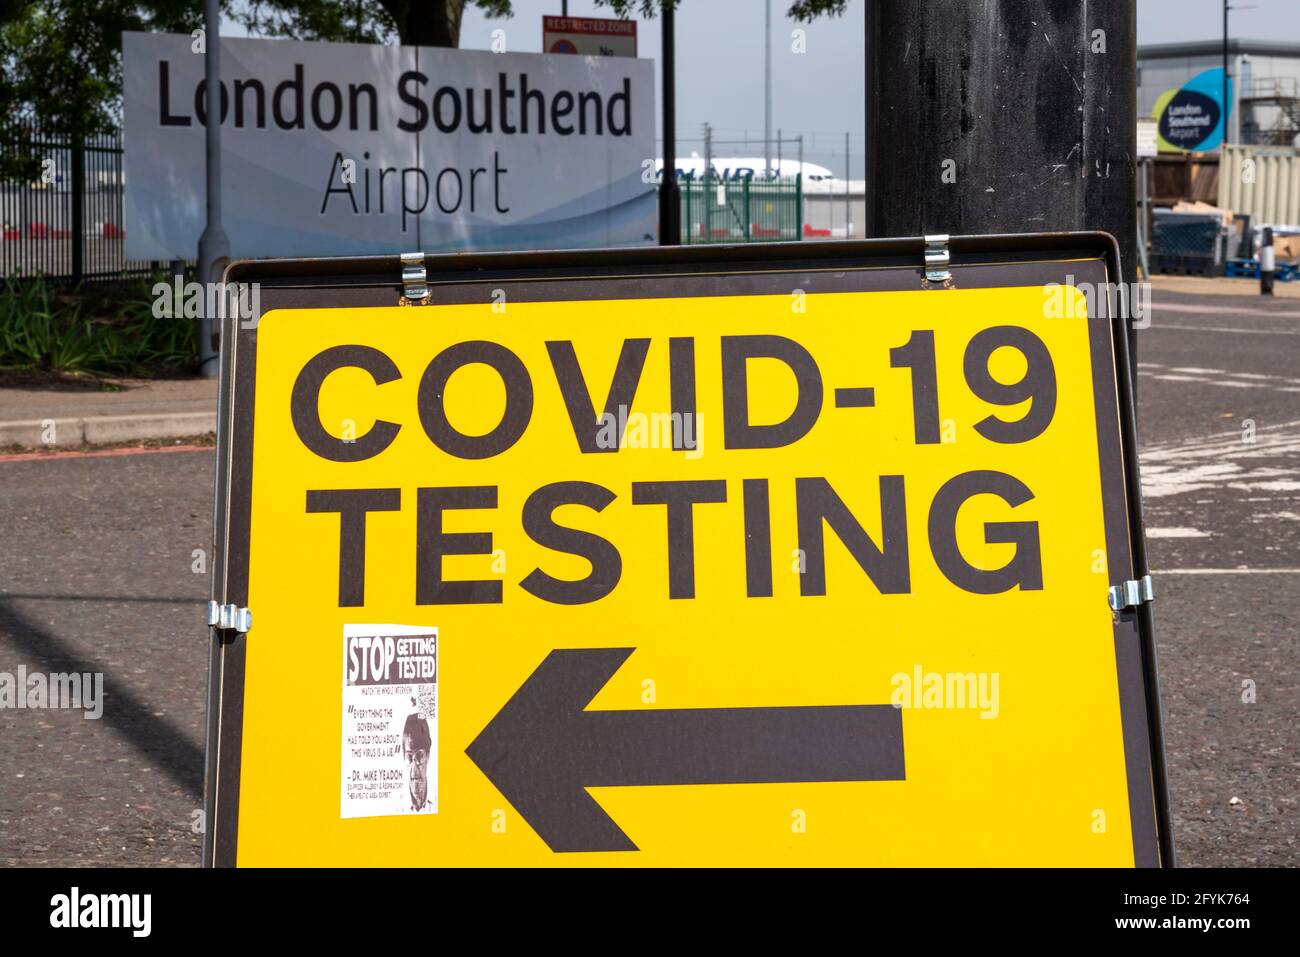 COVID 19 testing station sign at London Southend Airport, Essex, UK. Airport sign. COVID denier fake news sticker on sign Stock Photo